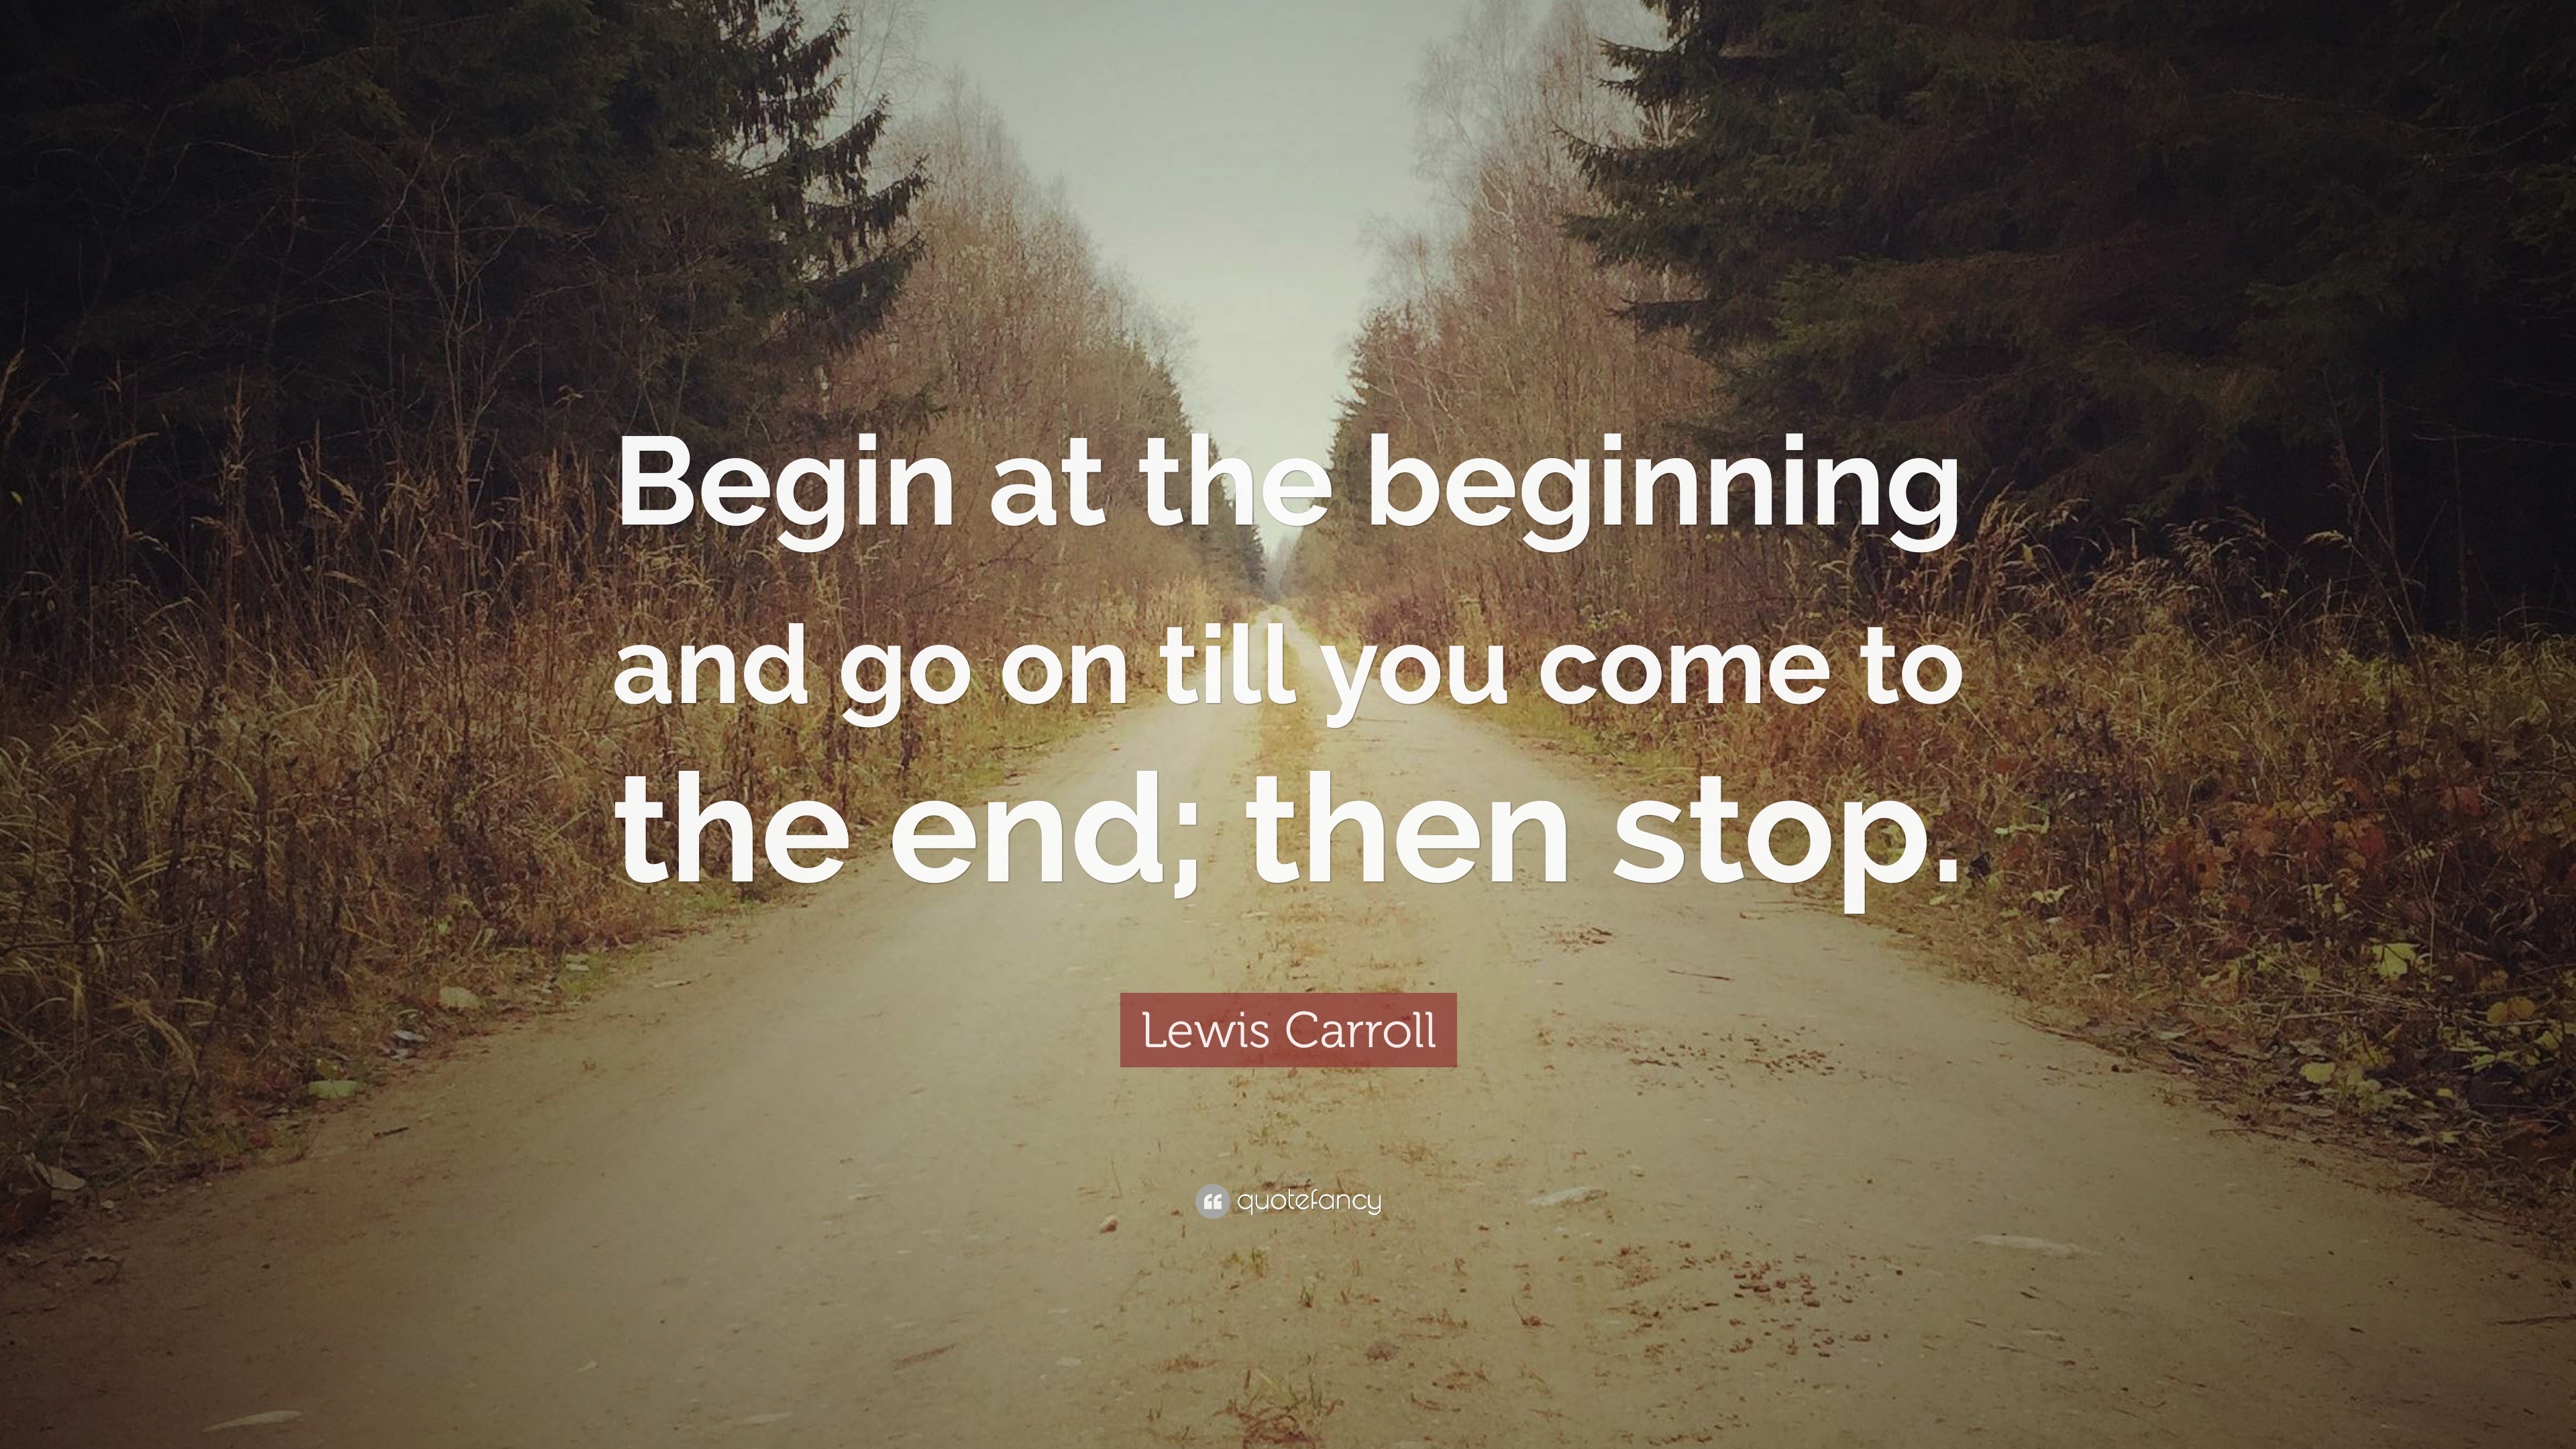 Lewis Carroll Quote: “Begin At The Beginning And Go On Till You Come To The End;